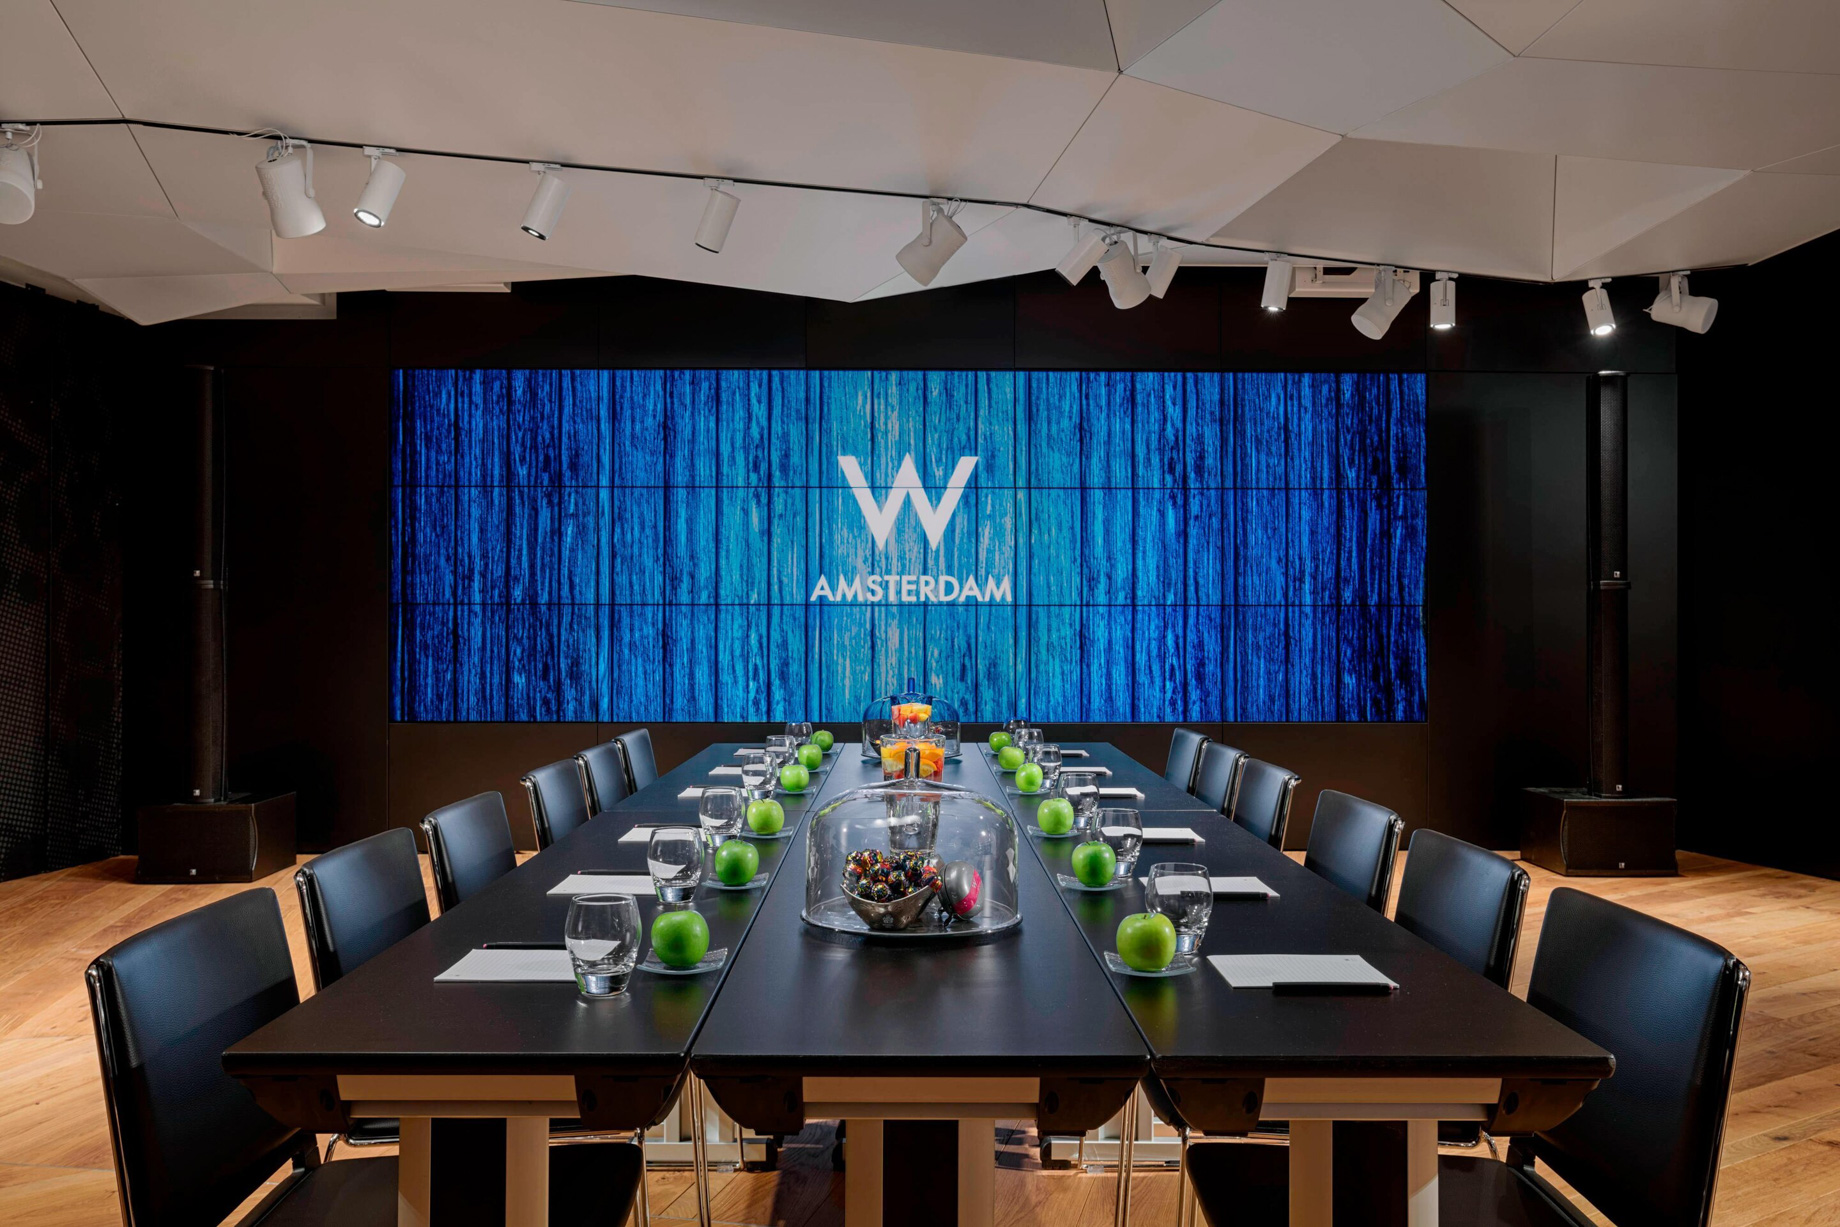 W Amsterdam Hotel – Amsterdam, Netherlands – Great Room Conference